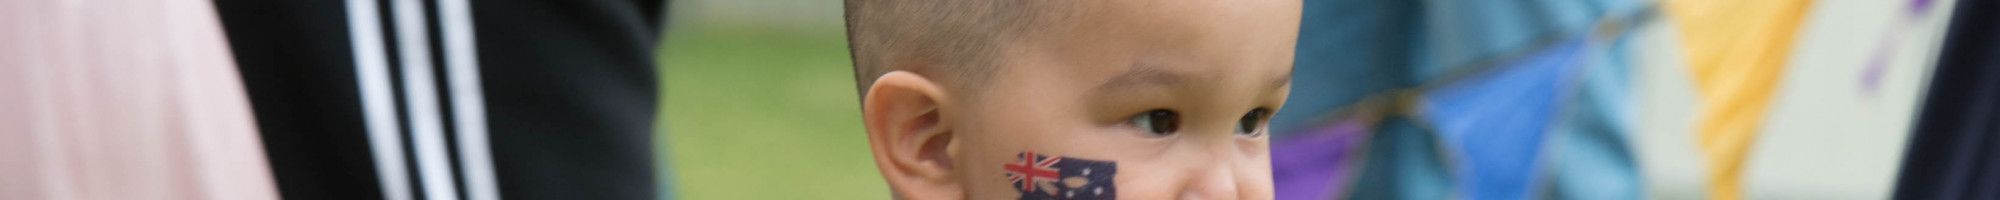 toddler with Australian flag tattoo on his cheek